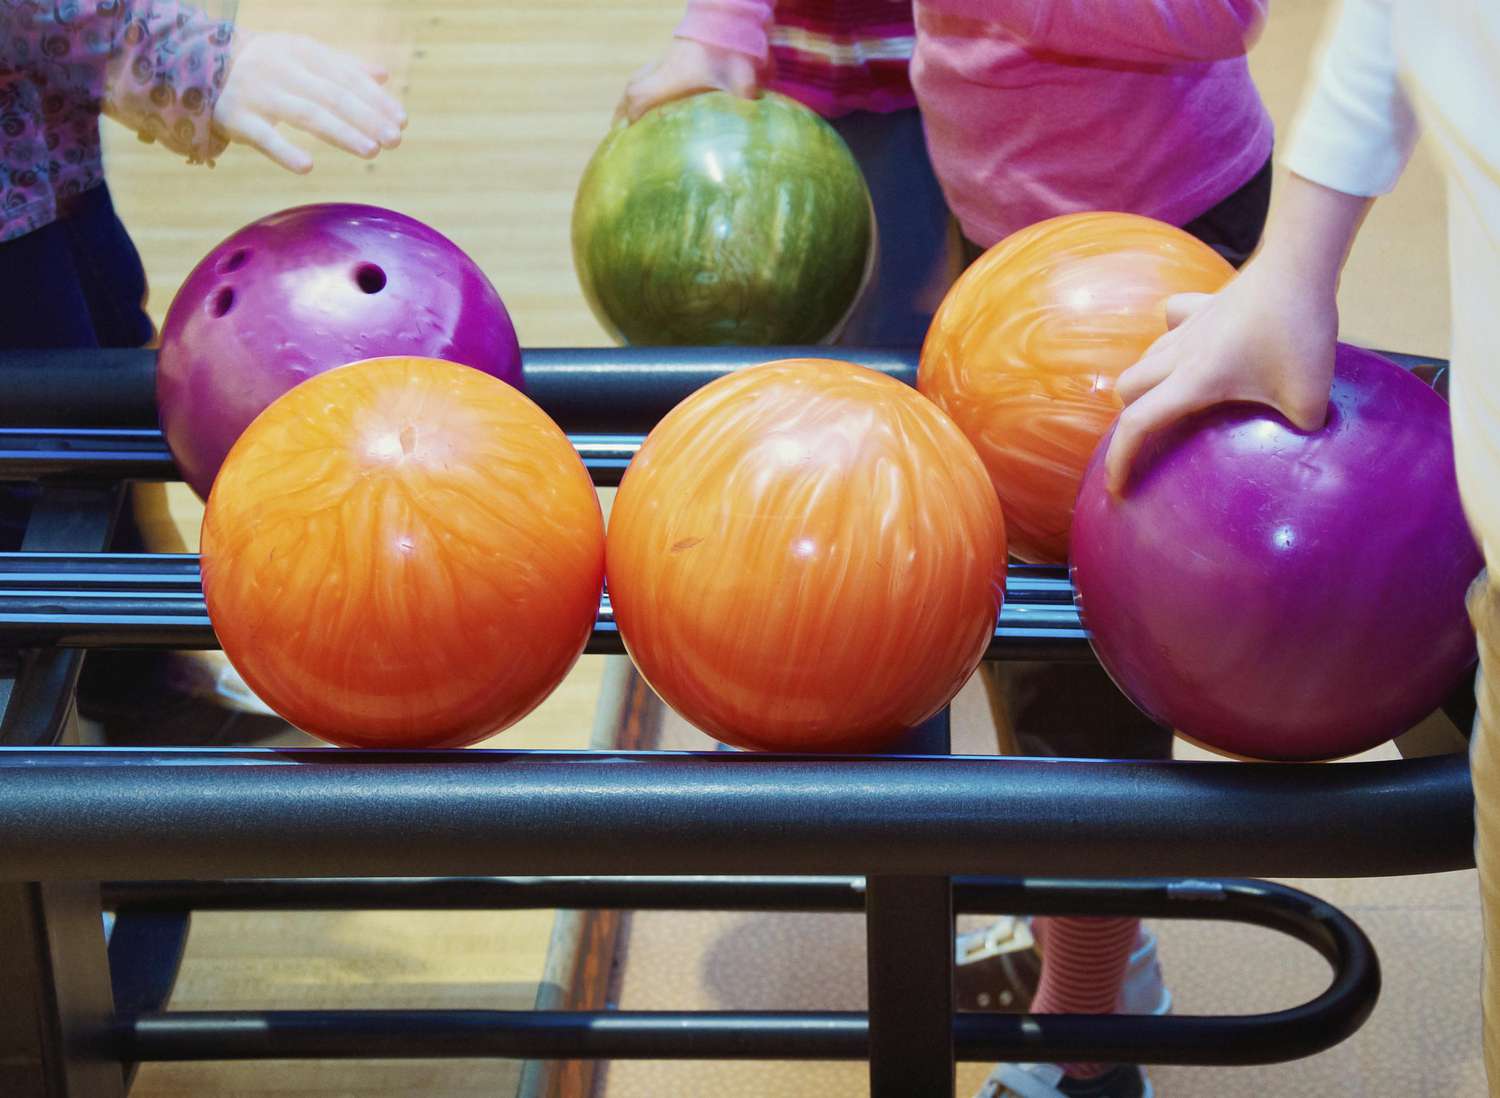 What Weight Bowling Ball Do Men Use?